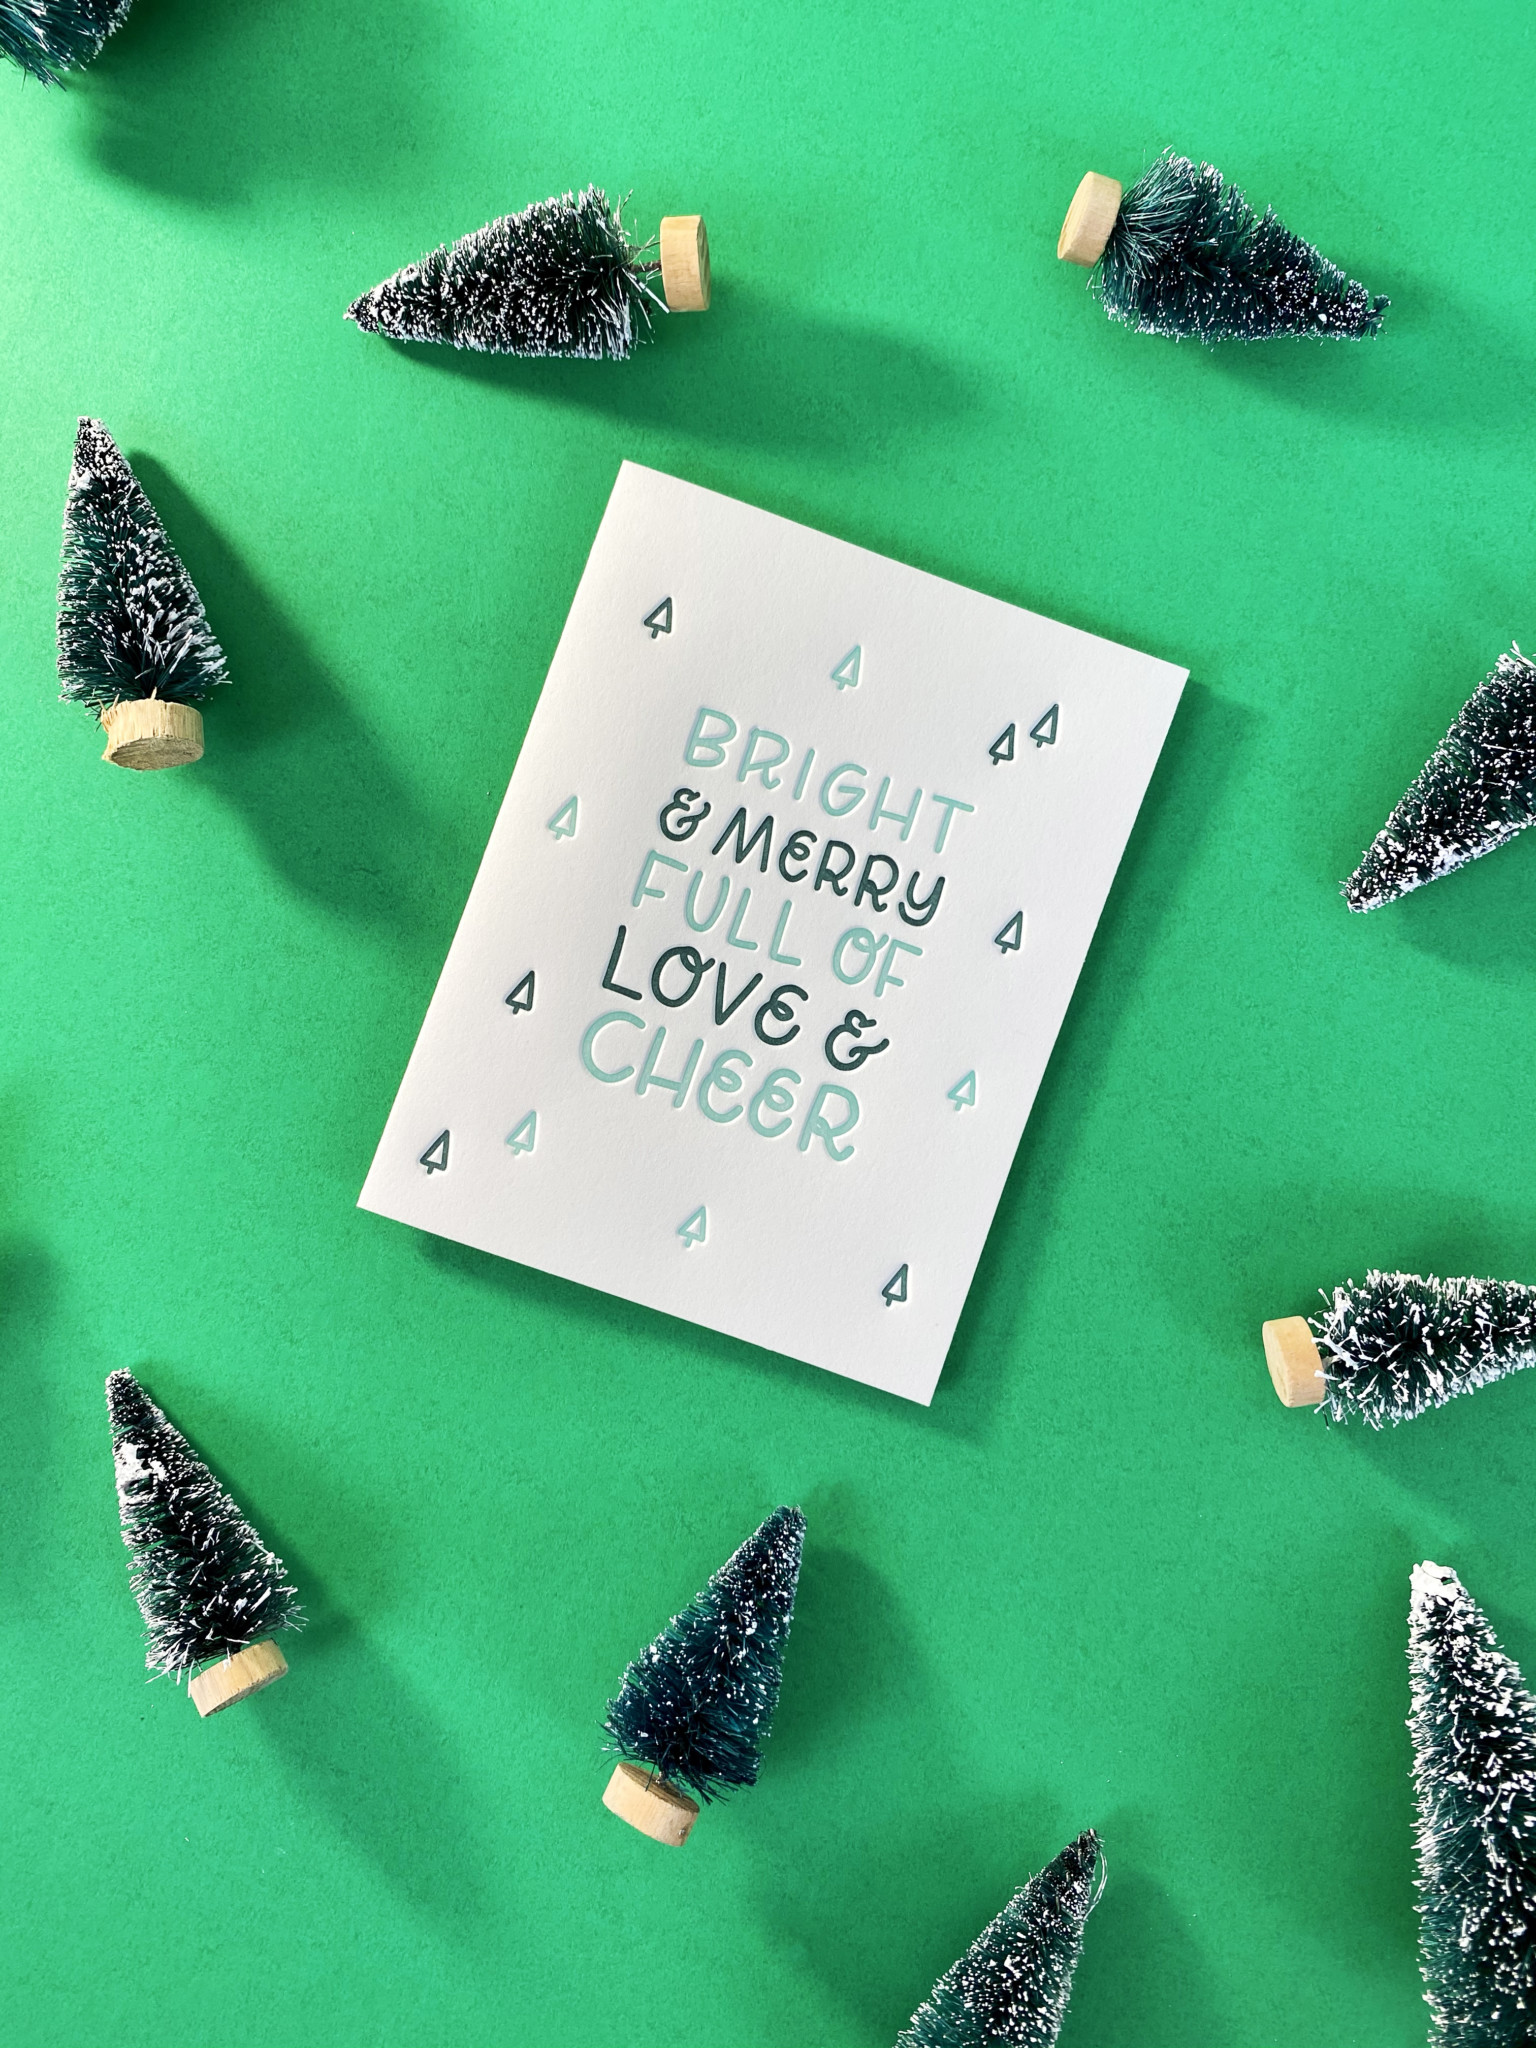 Card reads Bright & Merry, Full of Love & Cheer